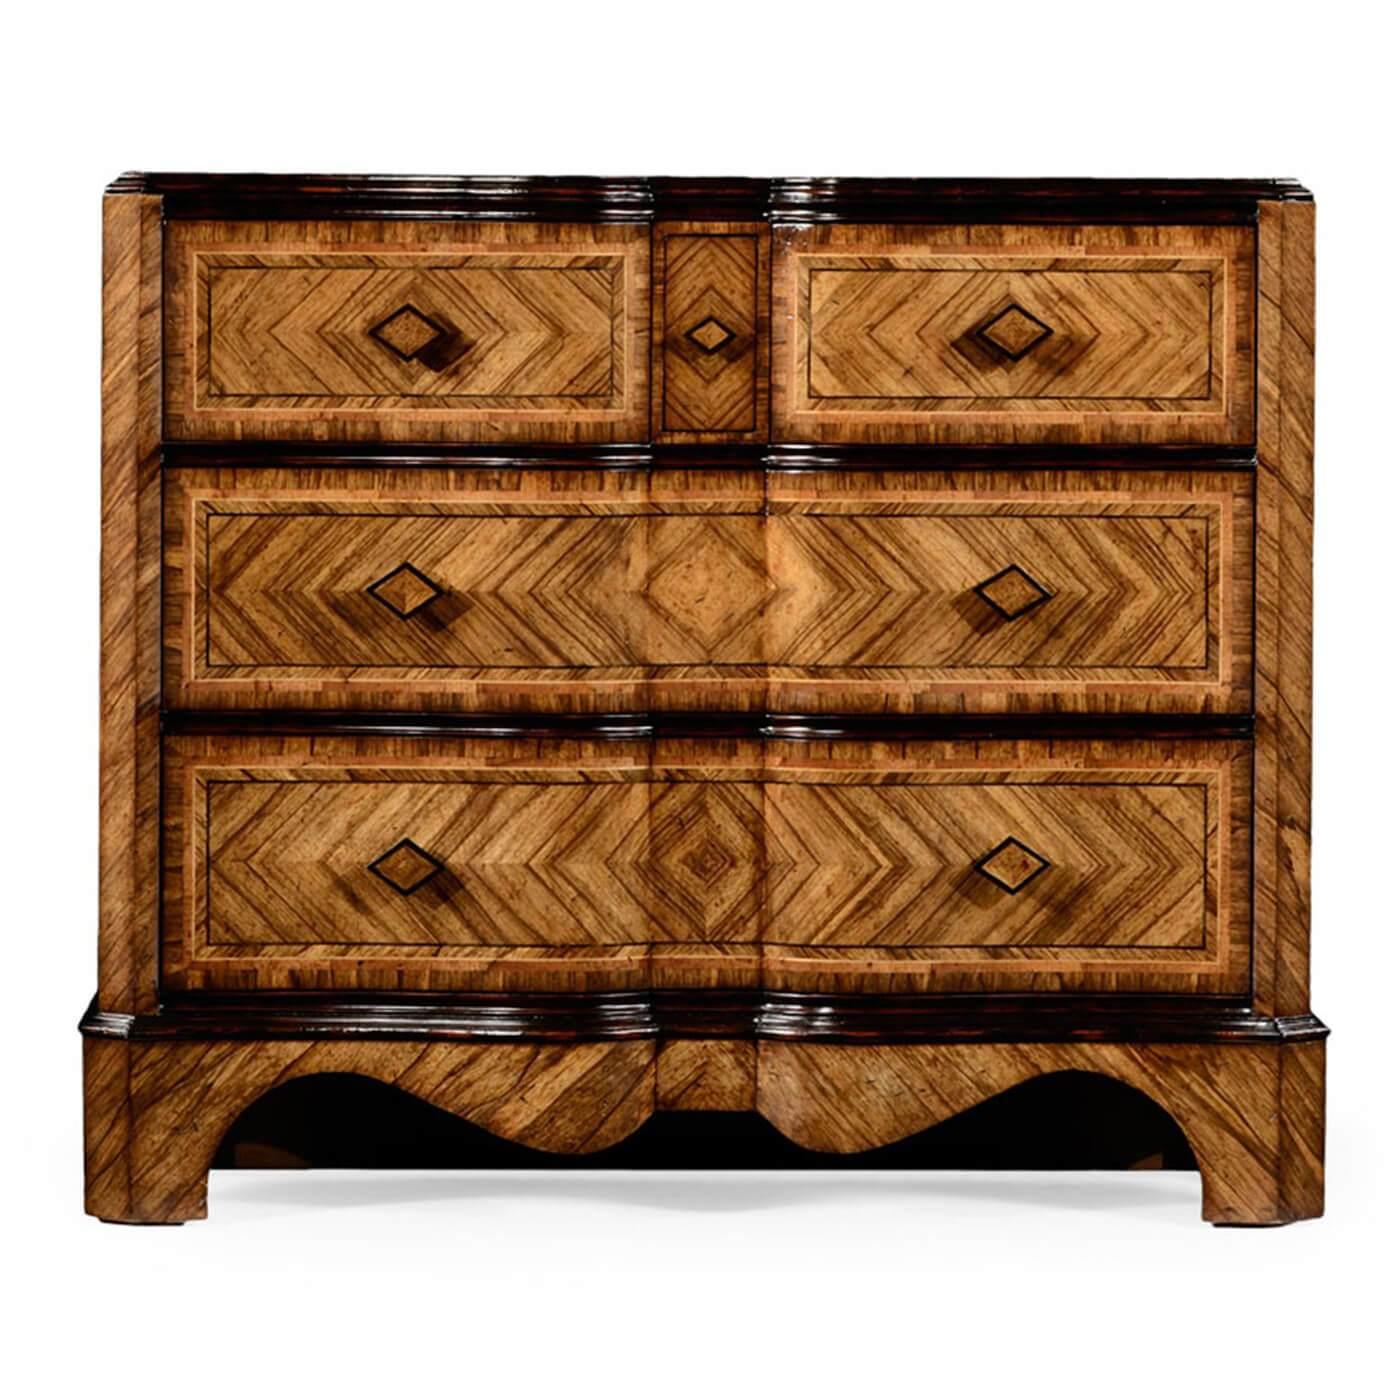 European Antique style chest of drawers with diamond forms Argentinian walnut wood veneers with six drawers. The top three above two lower long drawers.

Dimensions: 42